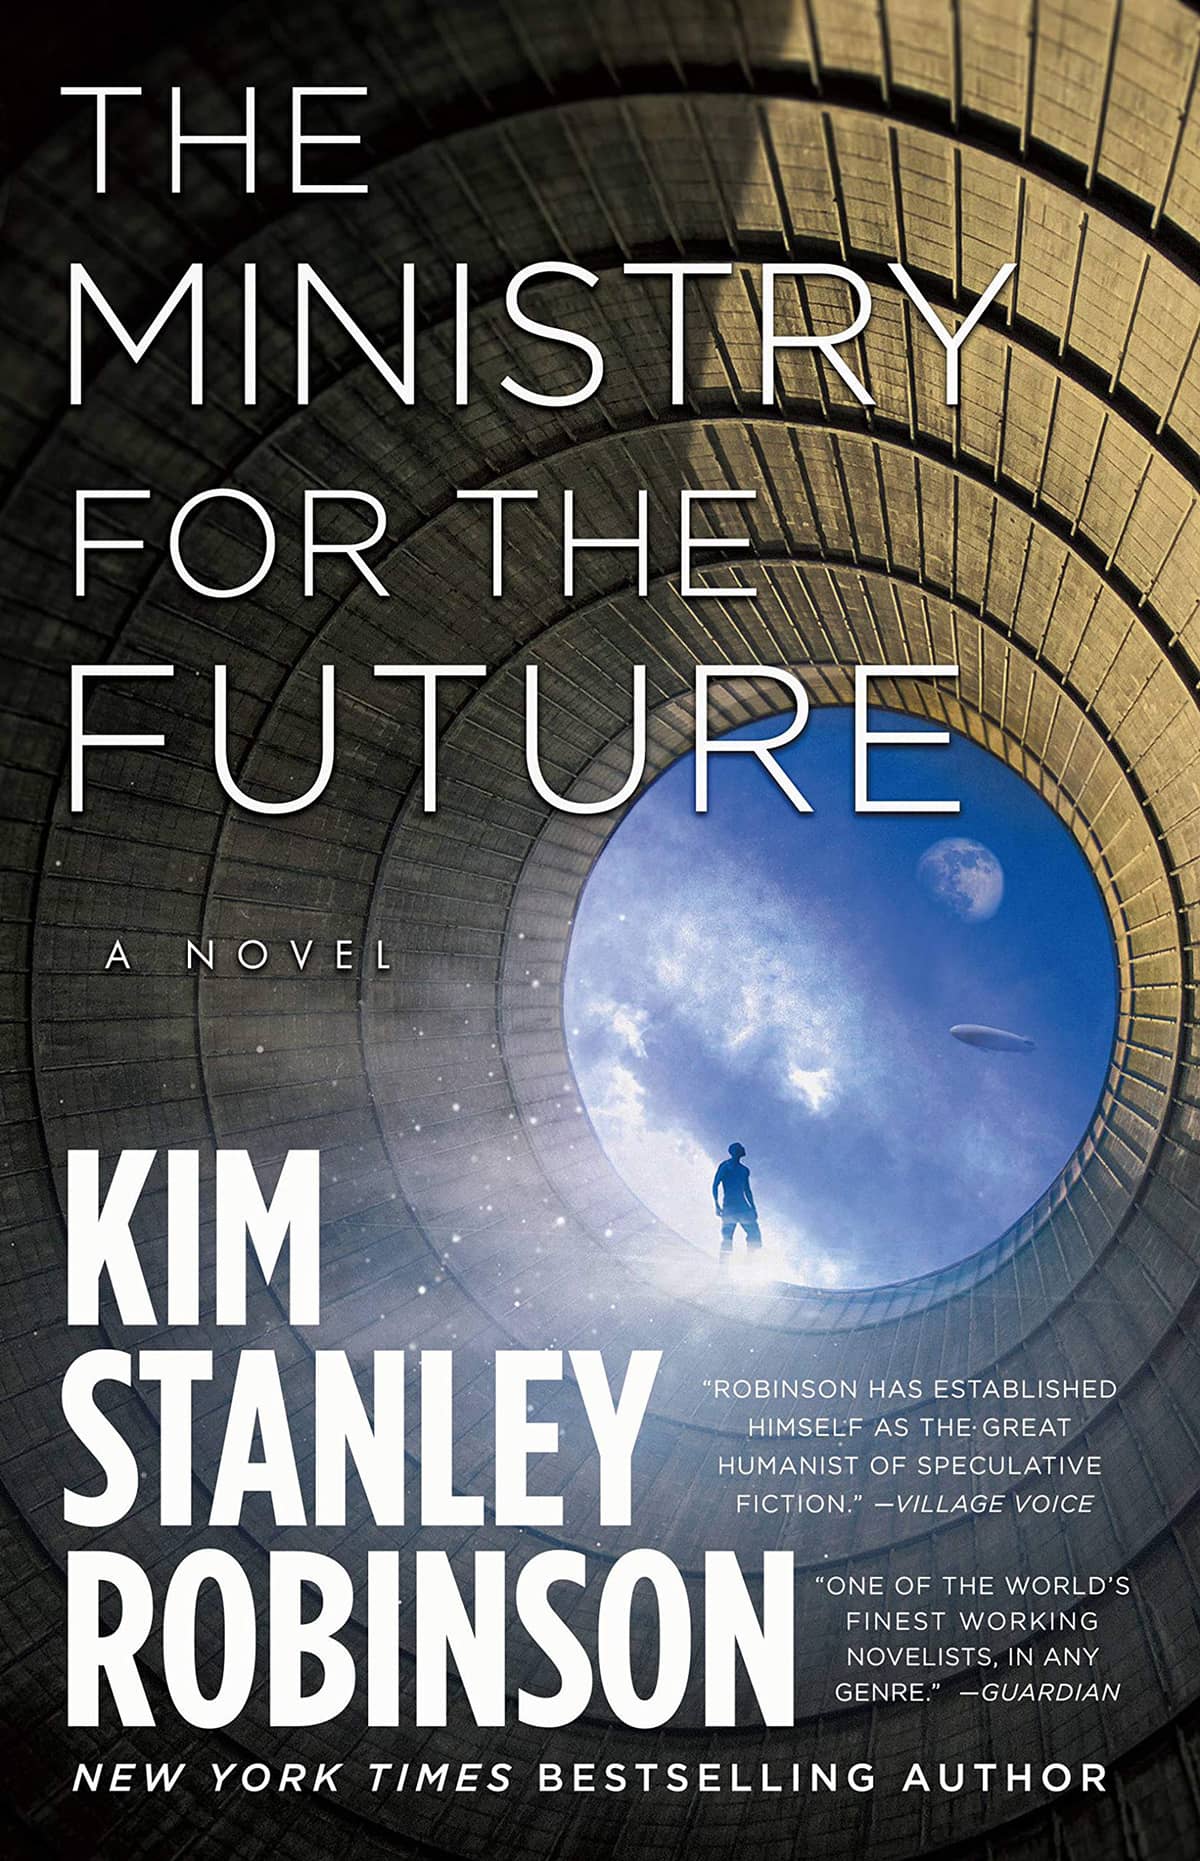 The cover of The Ministry for the Future